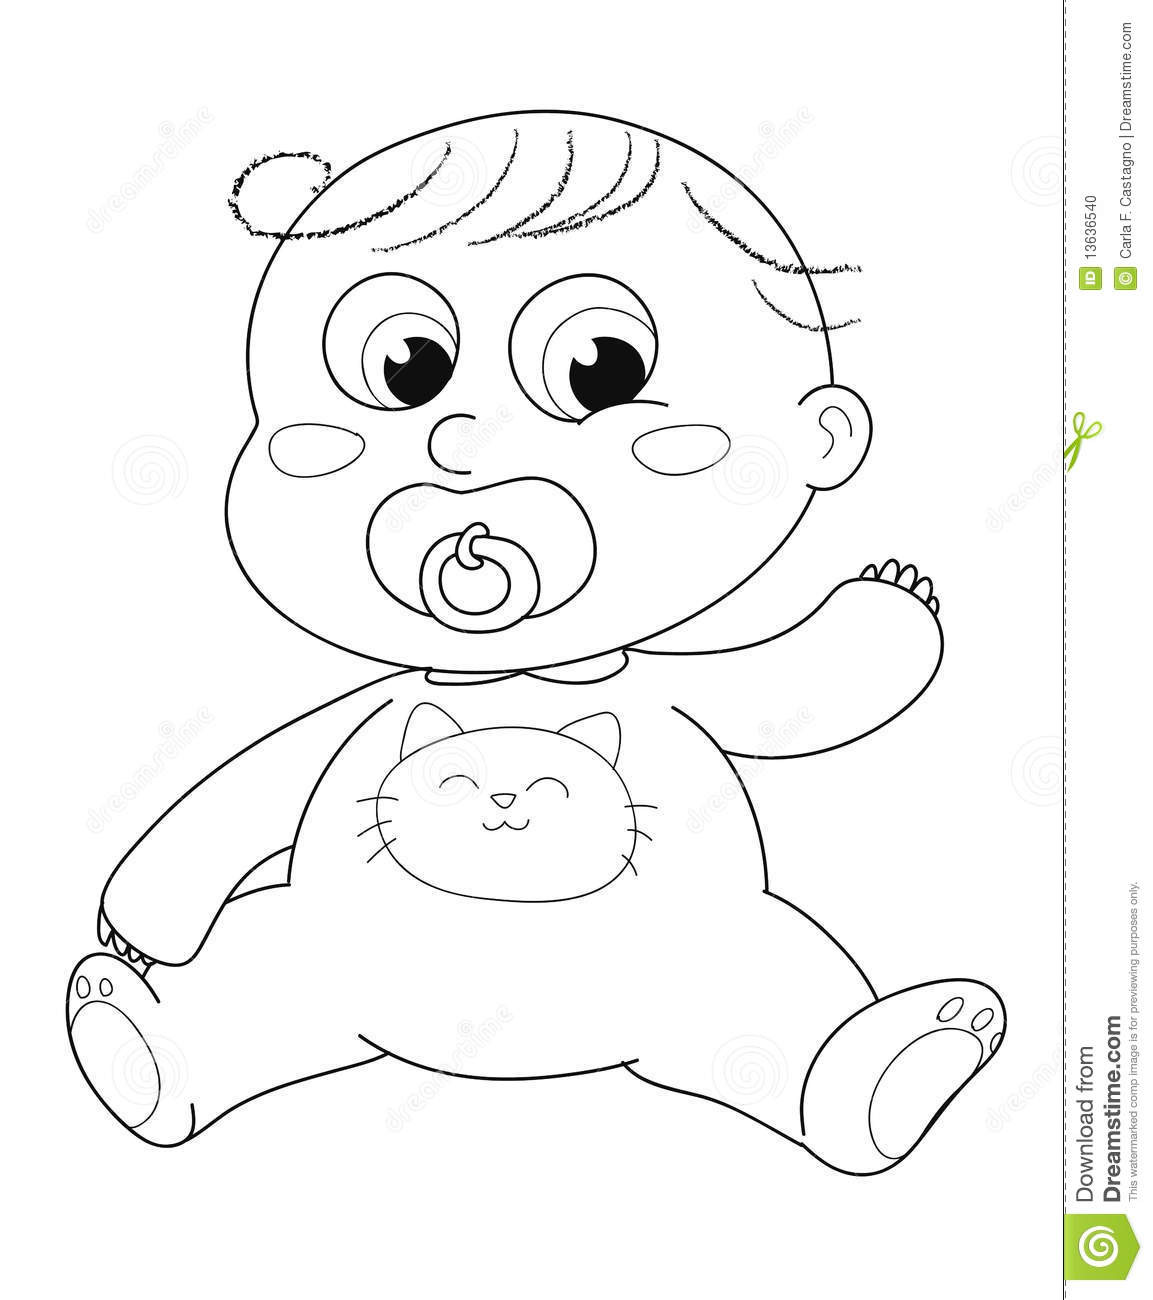 Baby Coloring Picture
 Cute baby coloring stock vector Image of babe babies